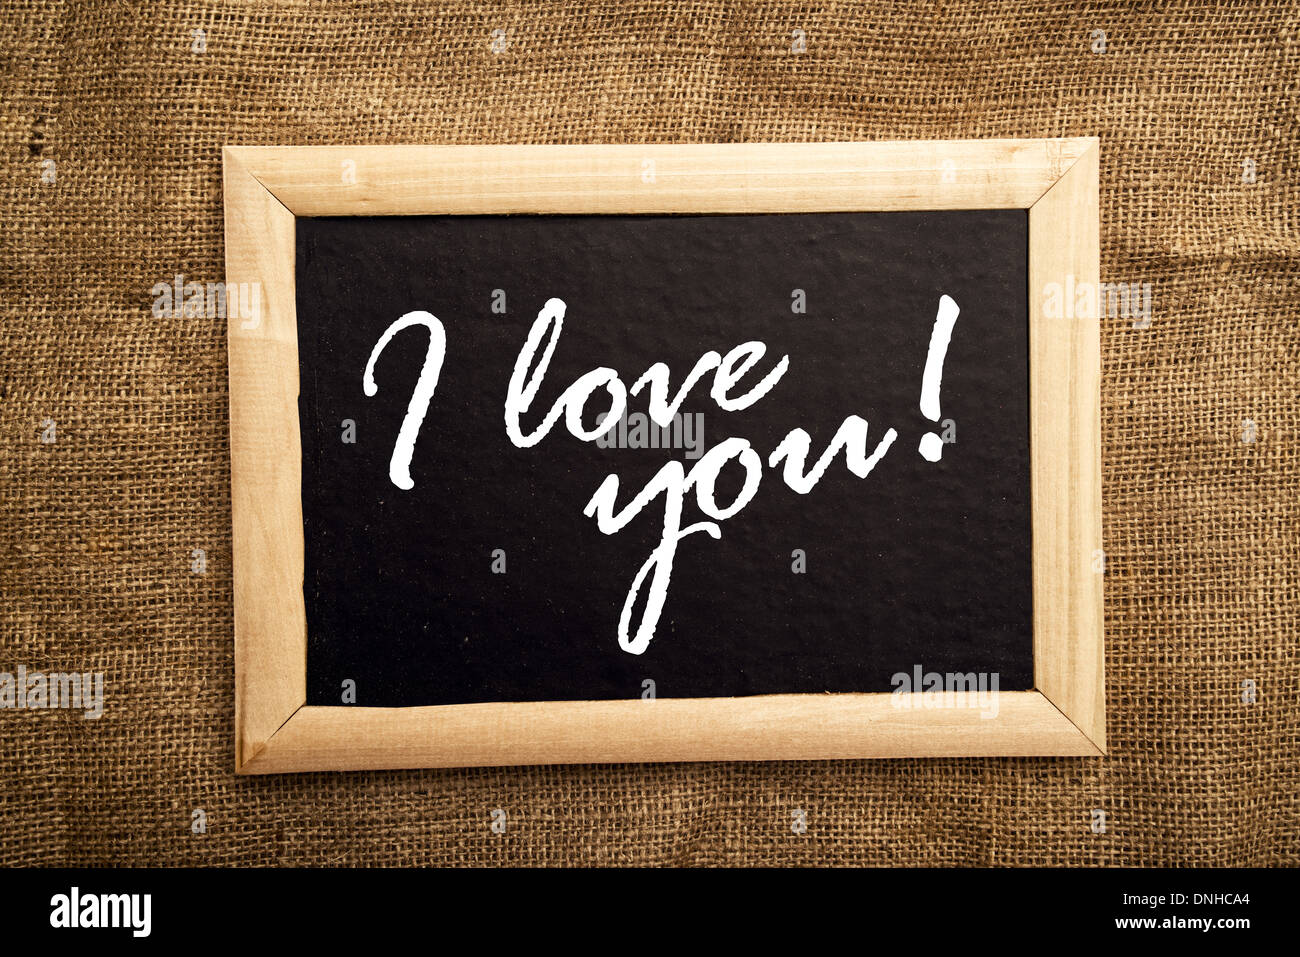 I love you note on black message board Stock Photo